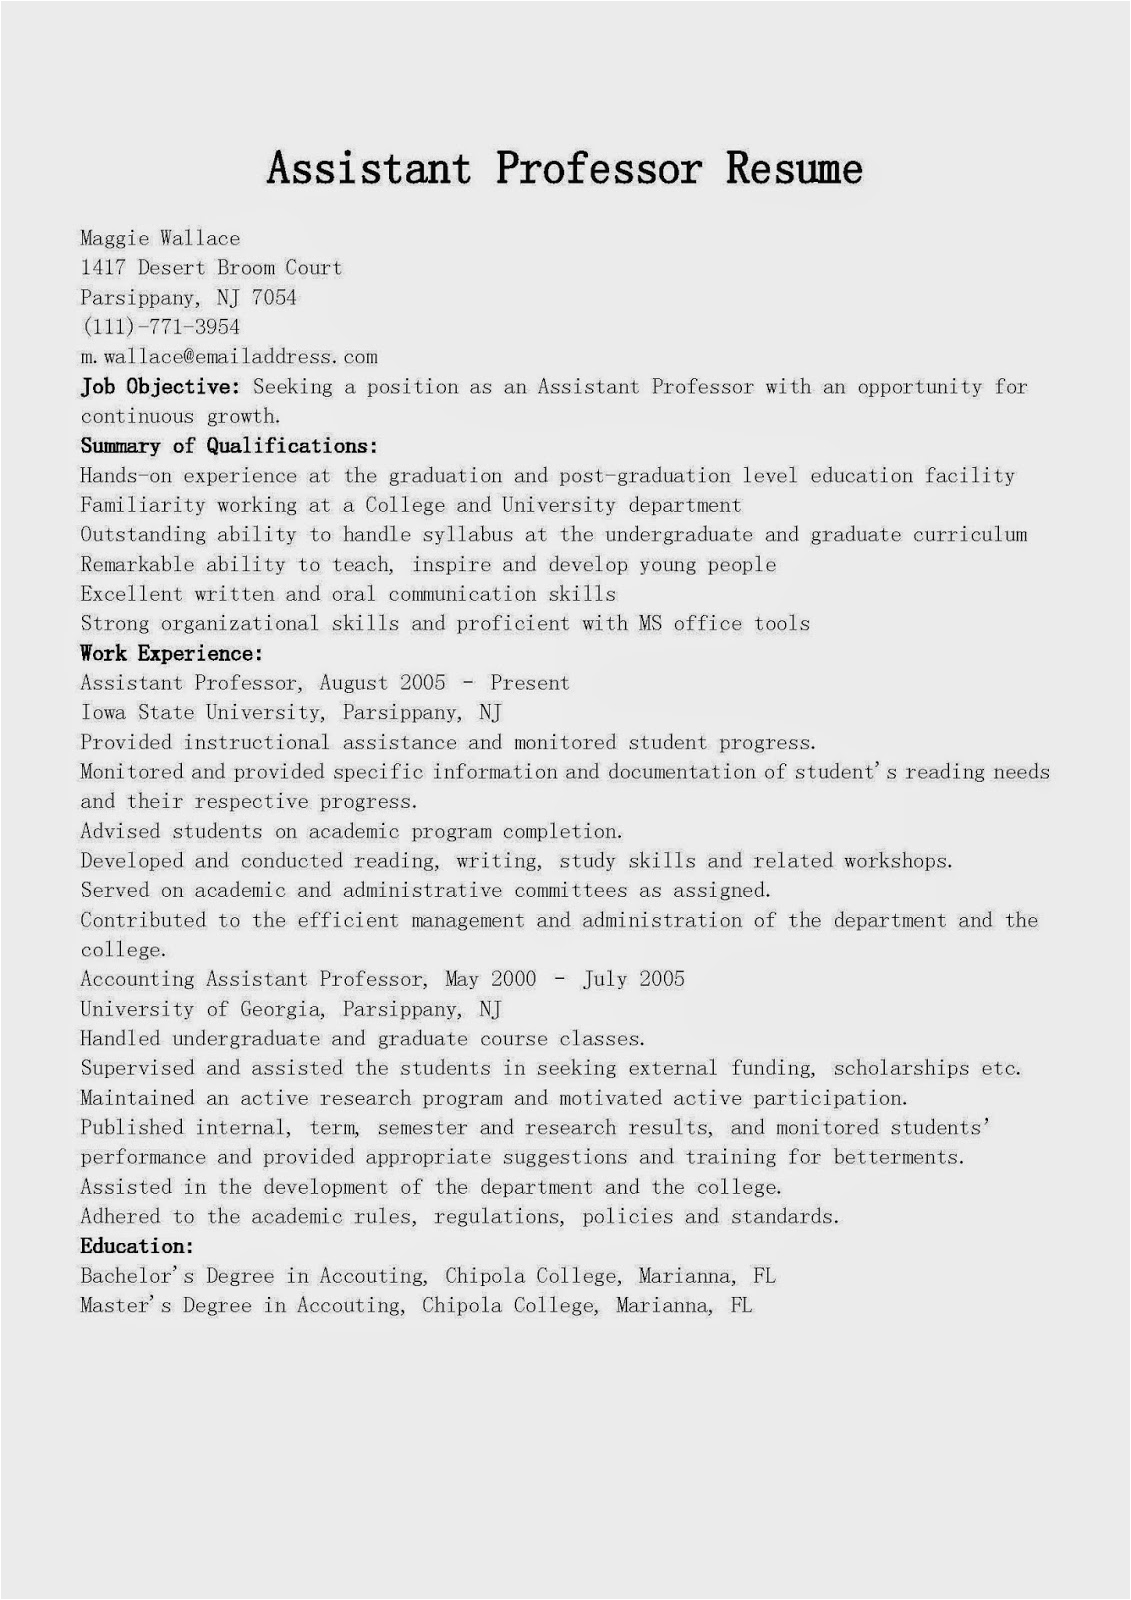 Sample Career Objective for assistant Professor Resume Resume Samples assistant Professor Resume Sample